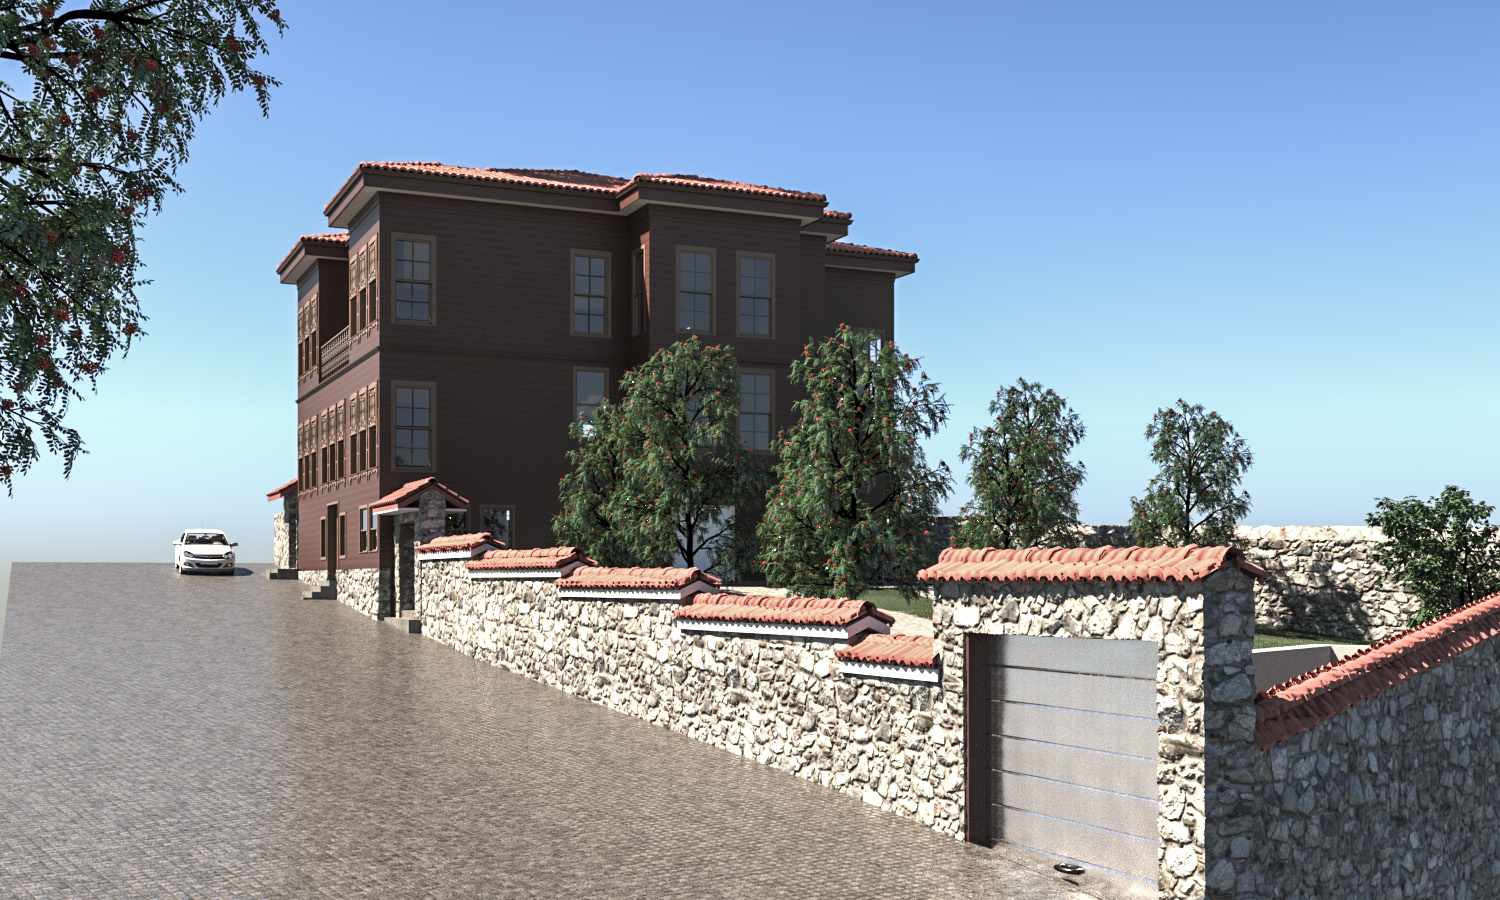  FATIH RESIDENCE RECONSTRUCTION PROJECT